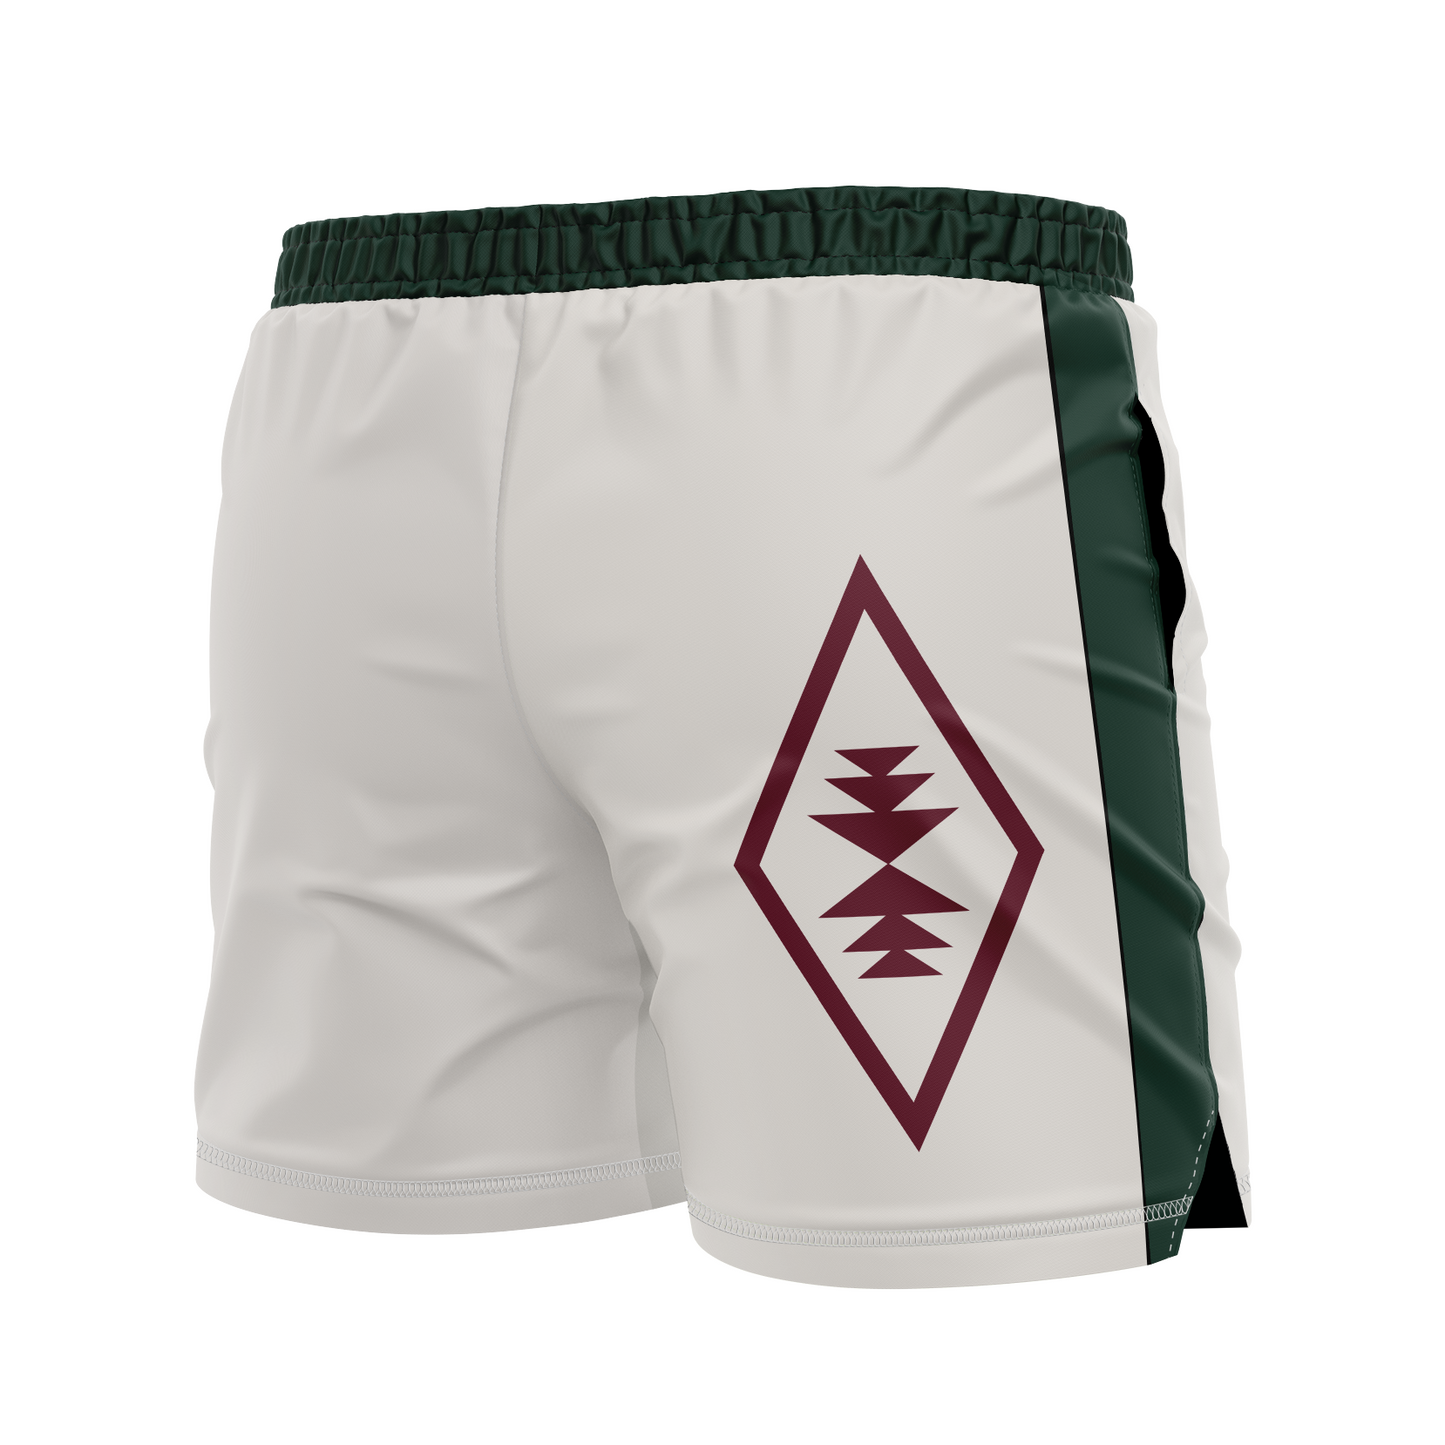 CCFC men's FC shorts Youngbloods, white with green and maroon